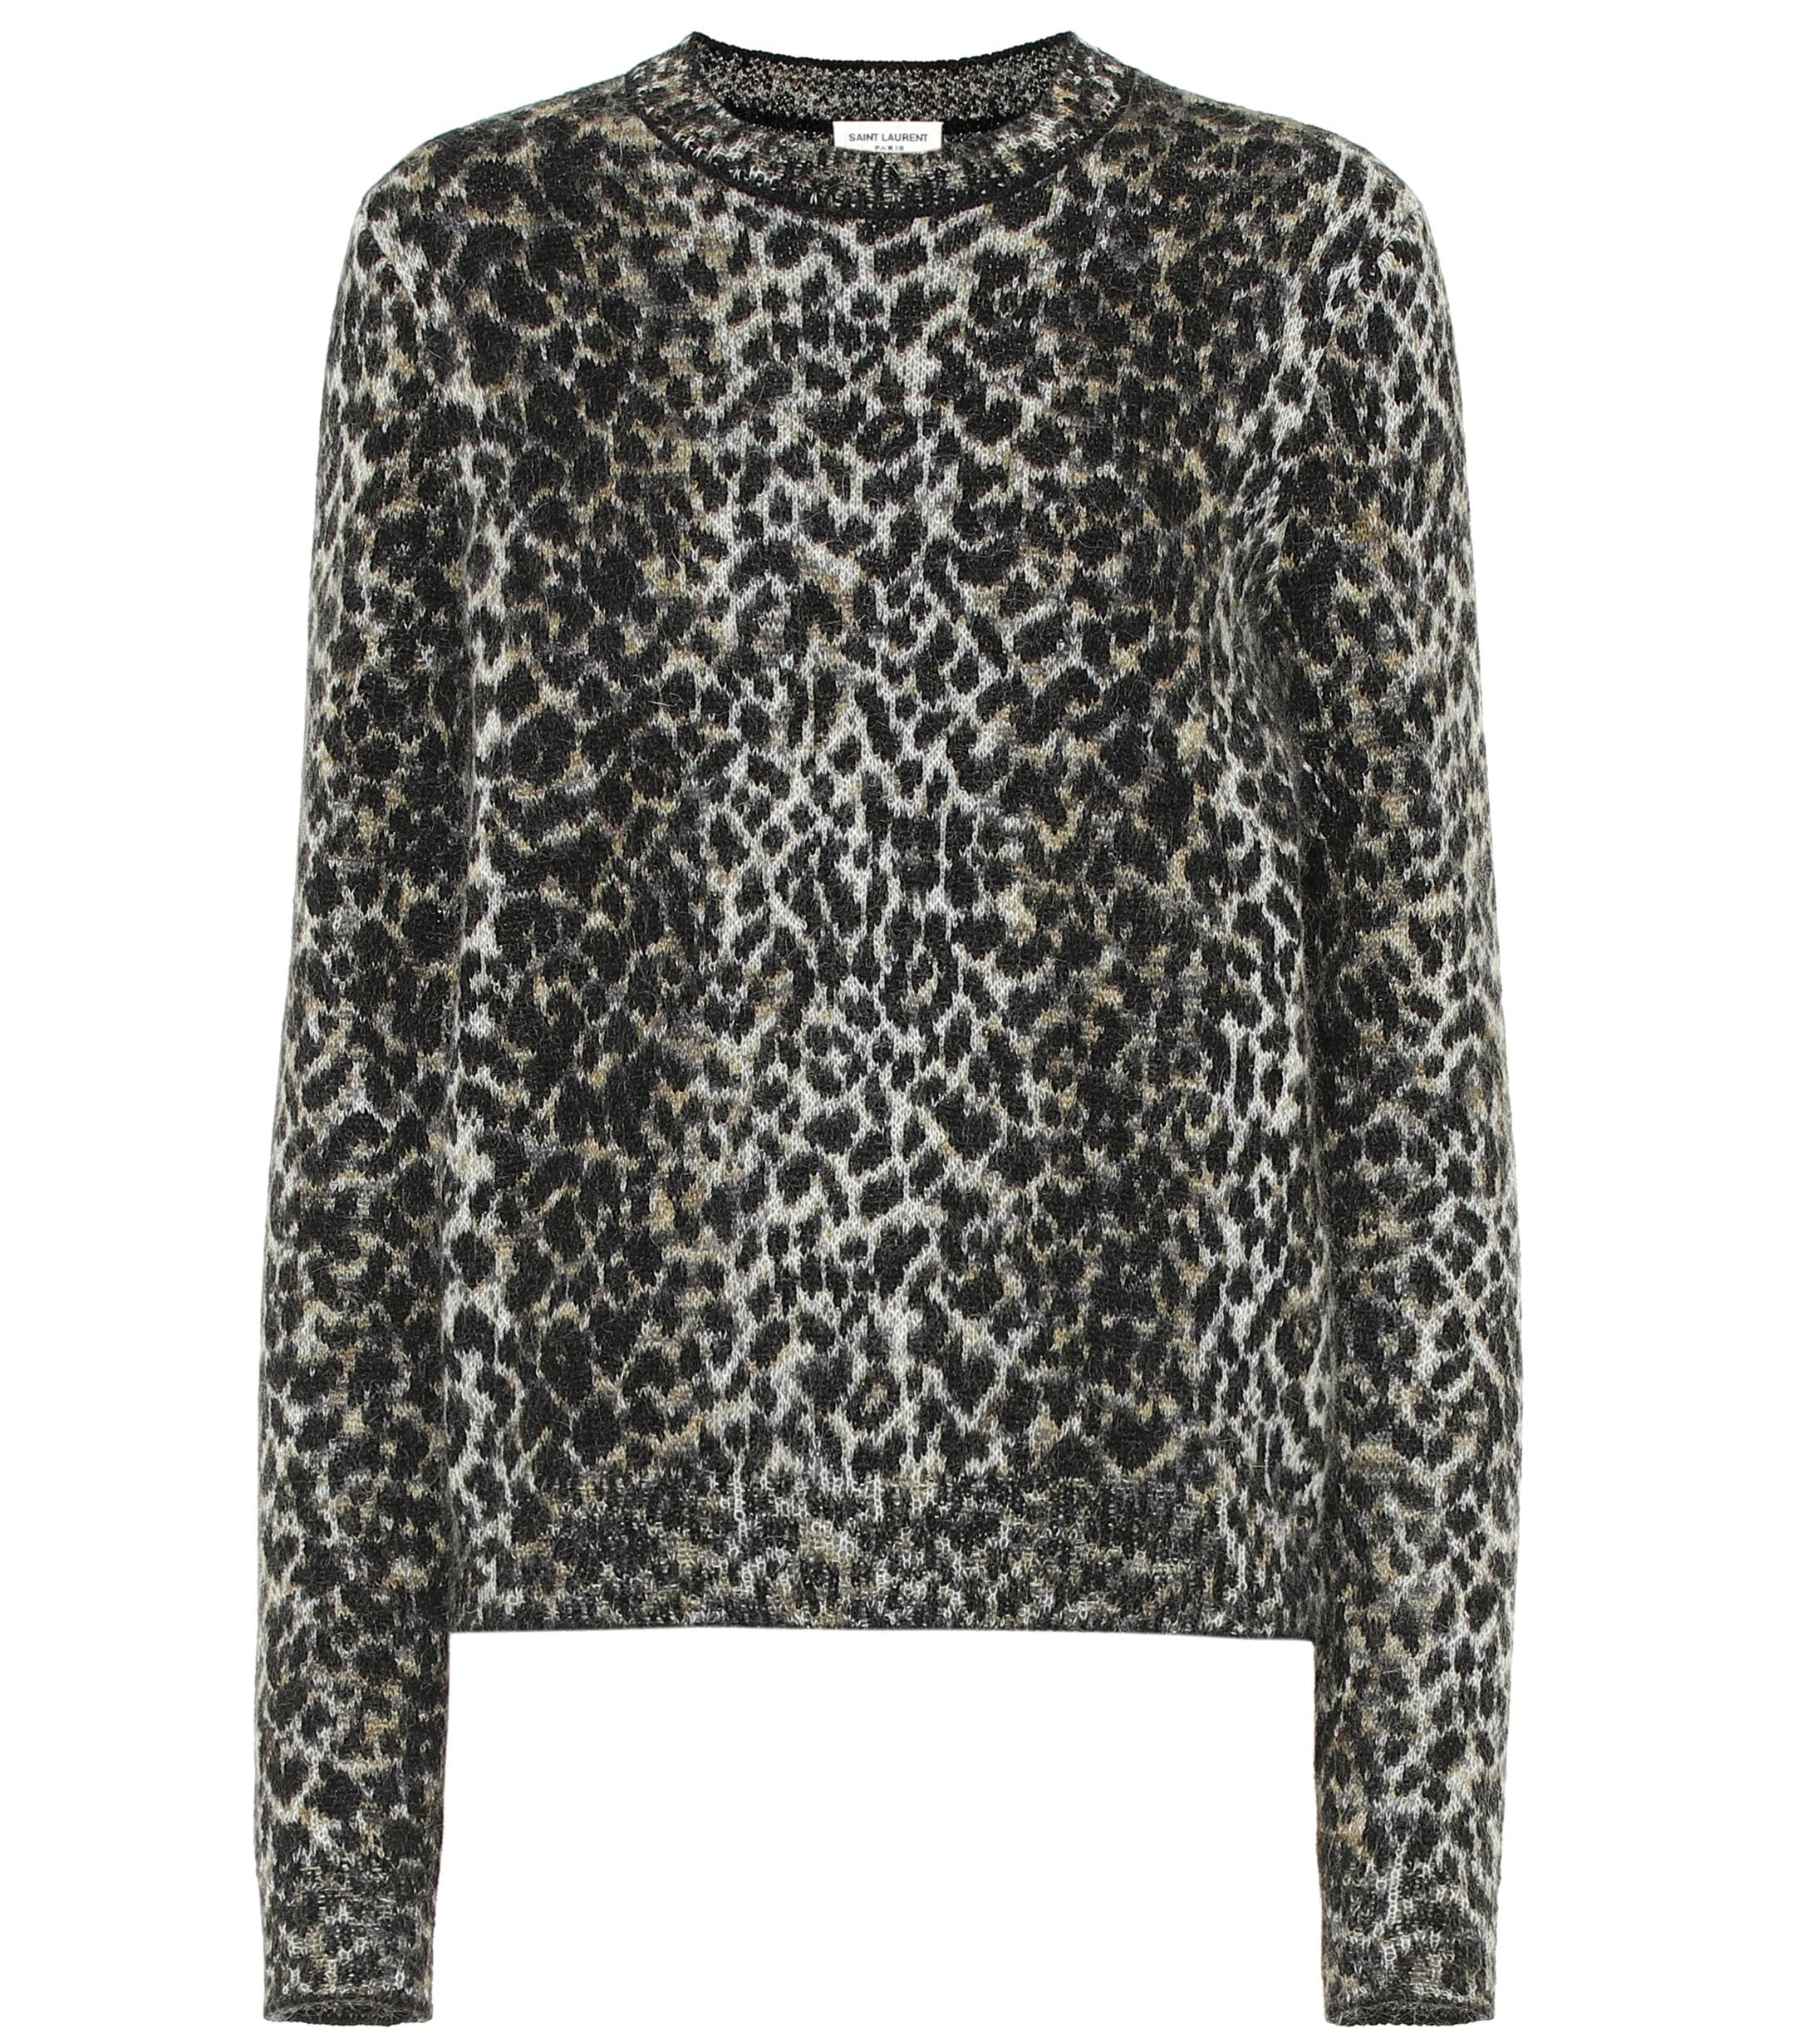 Saint Laurent Wool And Mohair-blend Sweater in Black - Lyst